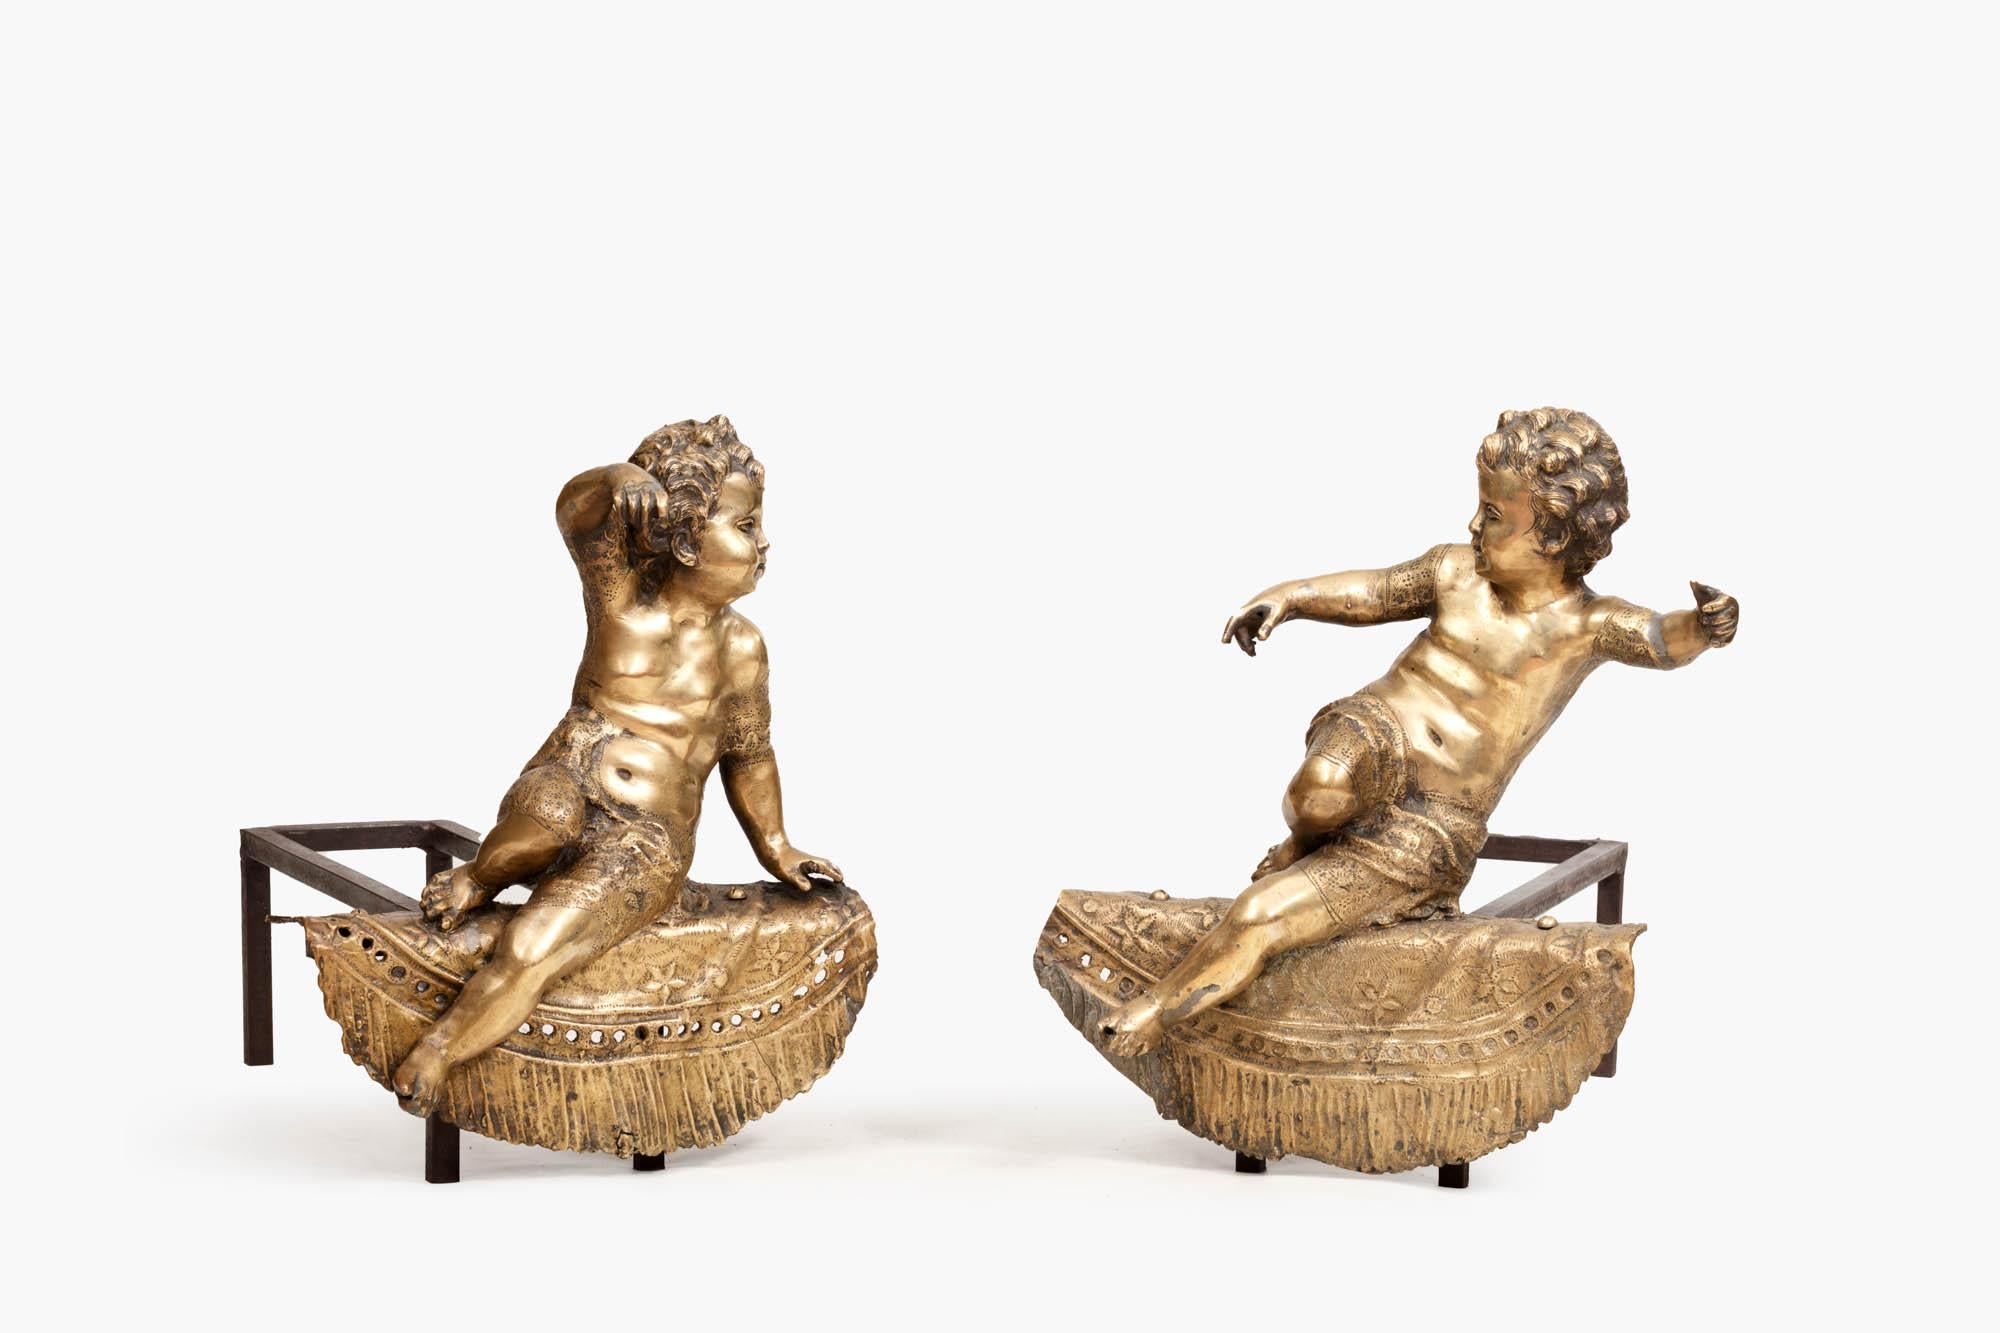 Pair of 19th Century brass fire dogs in the Louis XV style modeled as seated cherubs with outstretched arms. Each sits on a semicircular shelf with fringed and pierced drapery detailing, circa 1880.